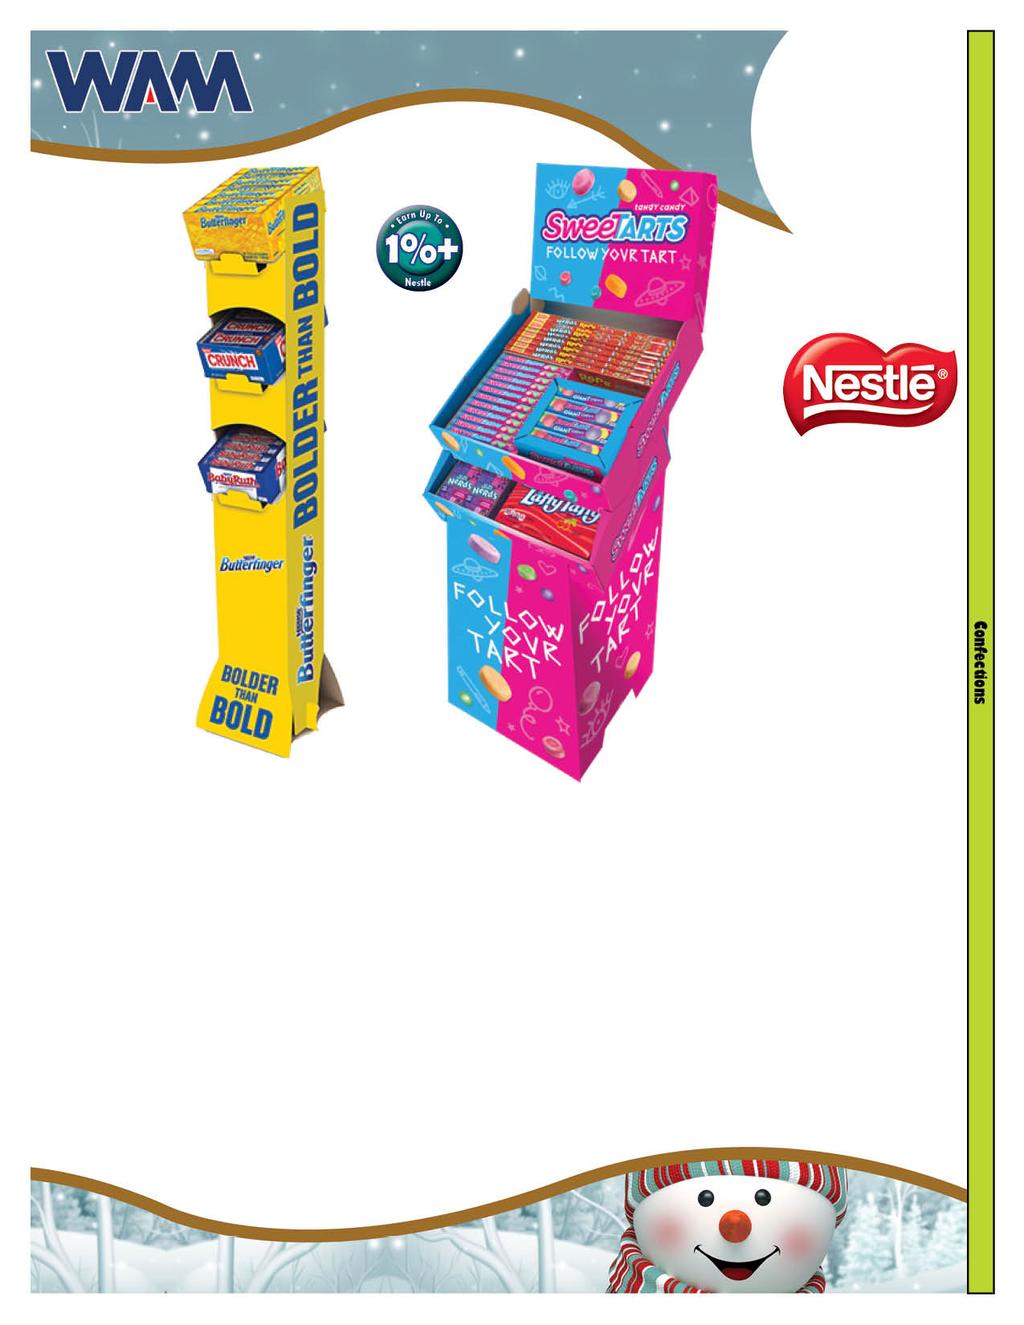 Up to 46.2% Delivery Date: 12/17/17 Nestle Assorted Chocolate Single Tower #77224 $62.22 $5.88 $56.34 $1.09 46.2% 300 998537 24 Baby Ruth 2.1oz 36 Butterfinger 1.9oz 36 Nestle Crunch 1.